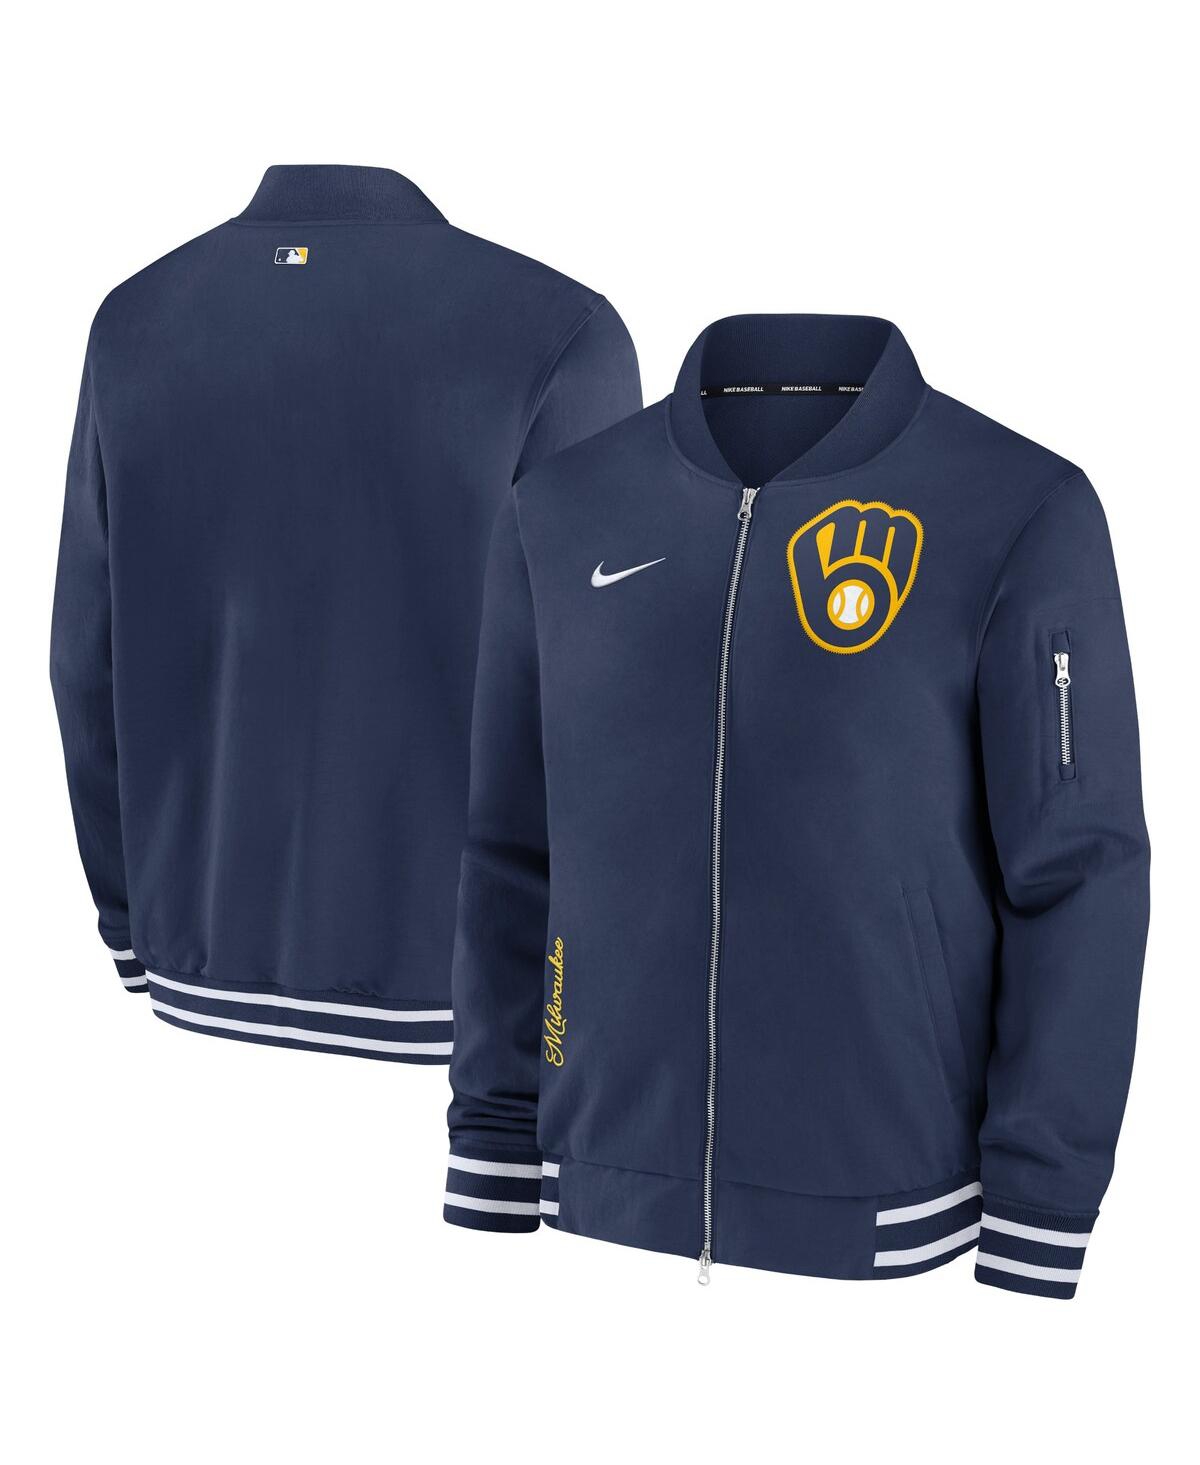 Shop Nike Men's  Navy Milwaukee Brewers Authentic Collection Full-zip Bomber Jacket